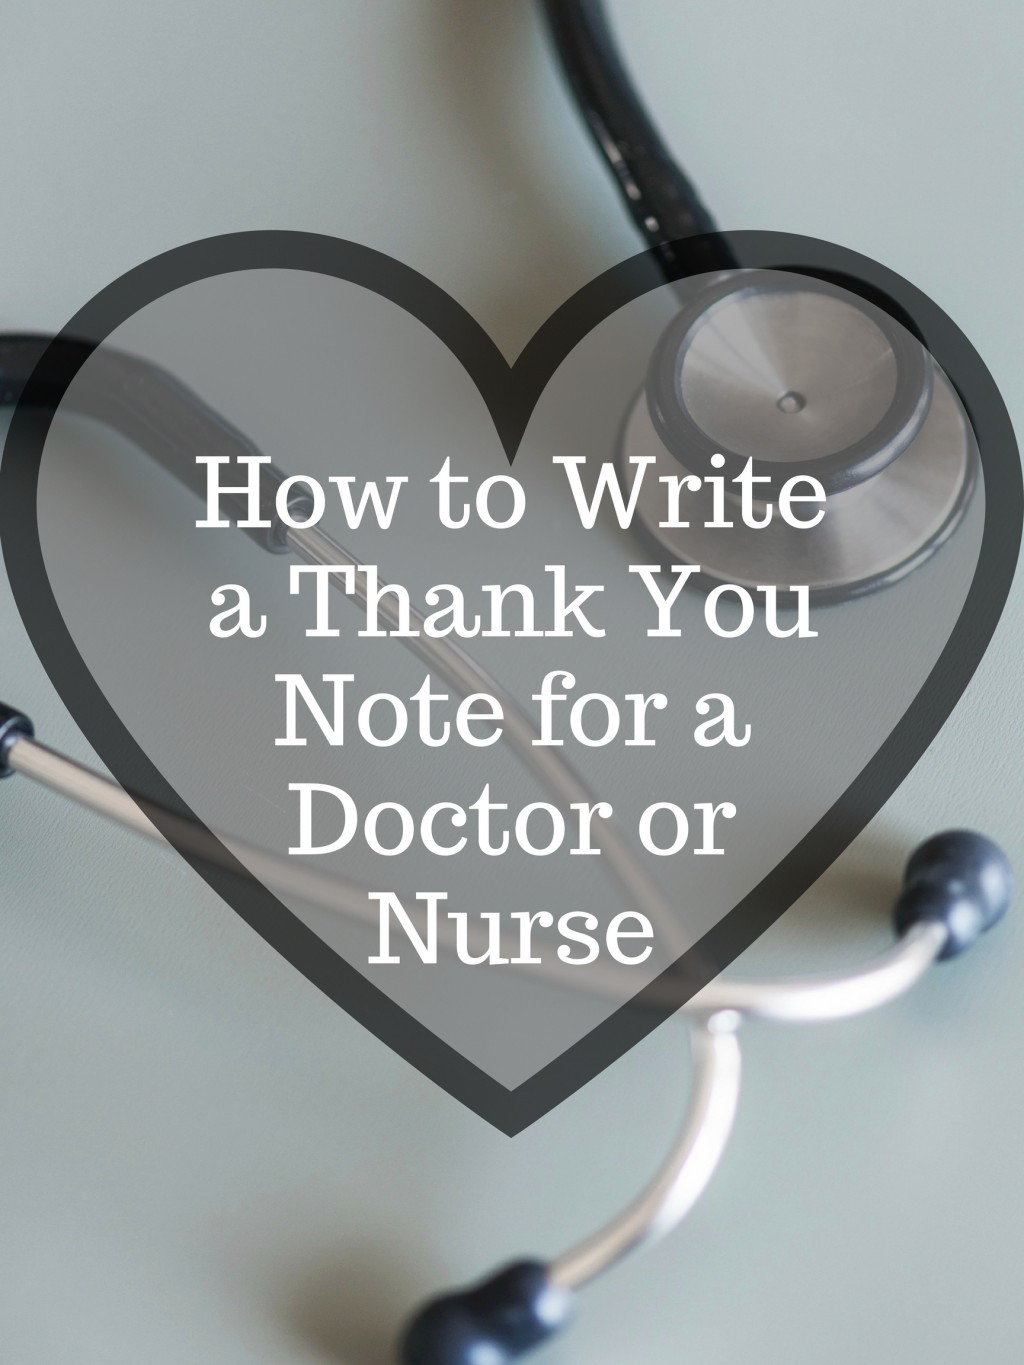 How To Thank Doctors And Nurses